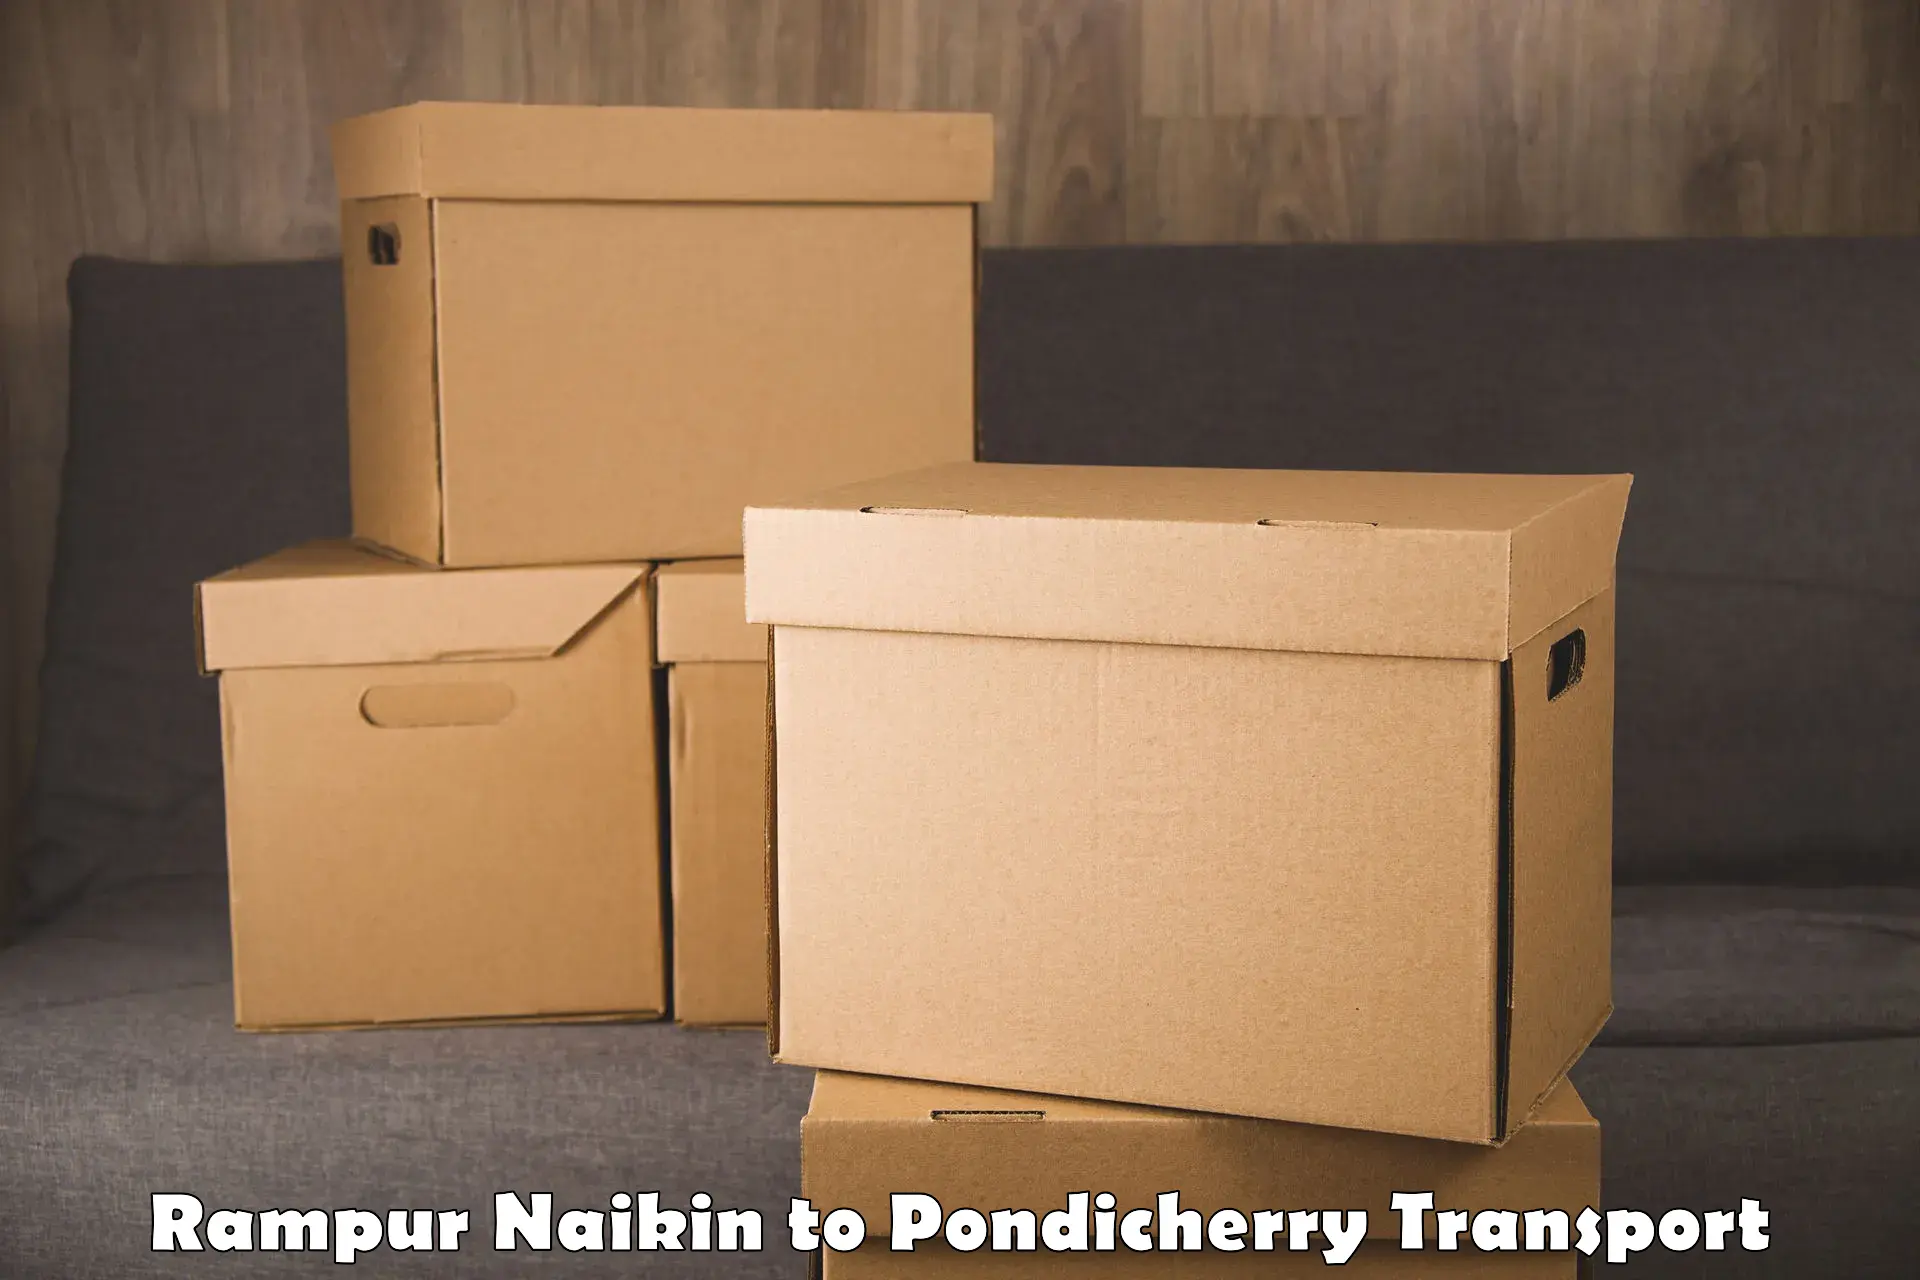 Scooty transport charges Rampur Naikin to Pondicherry